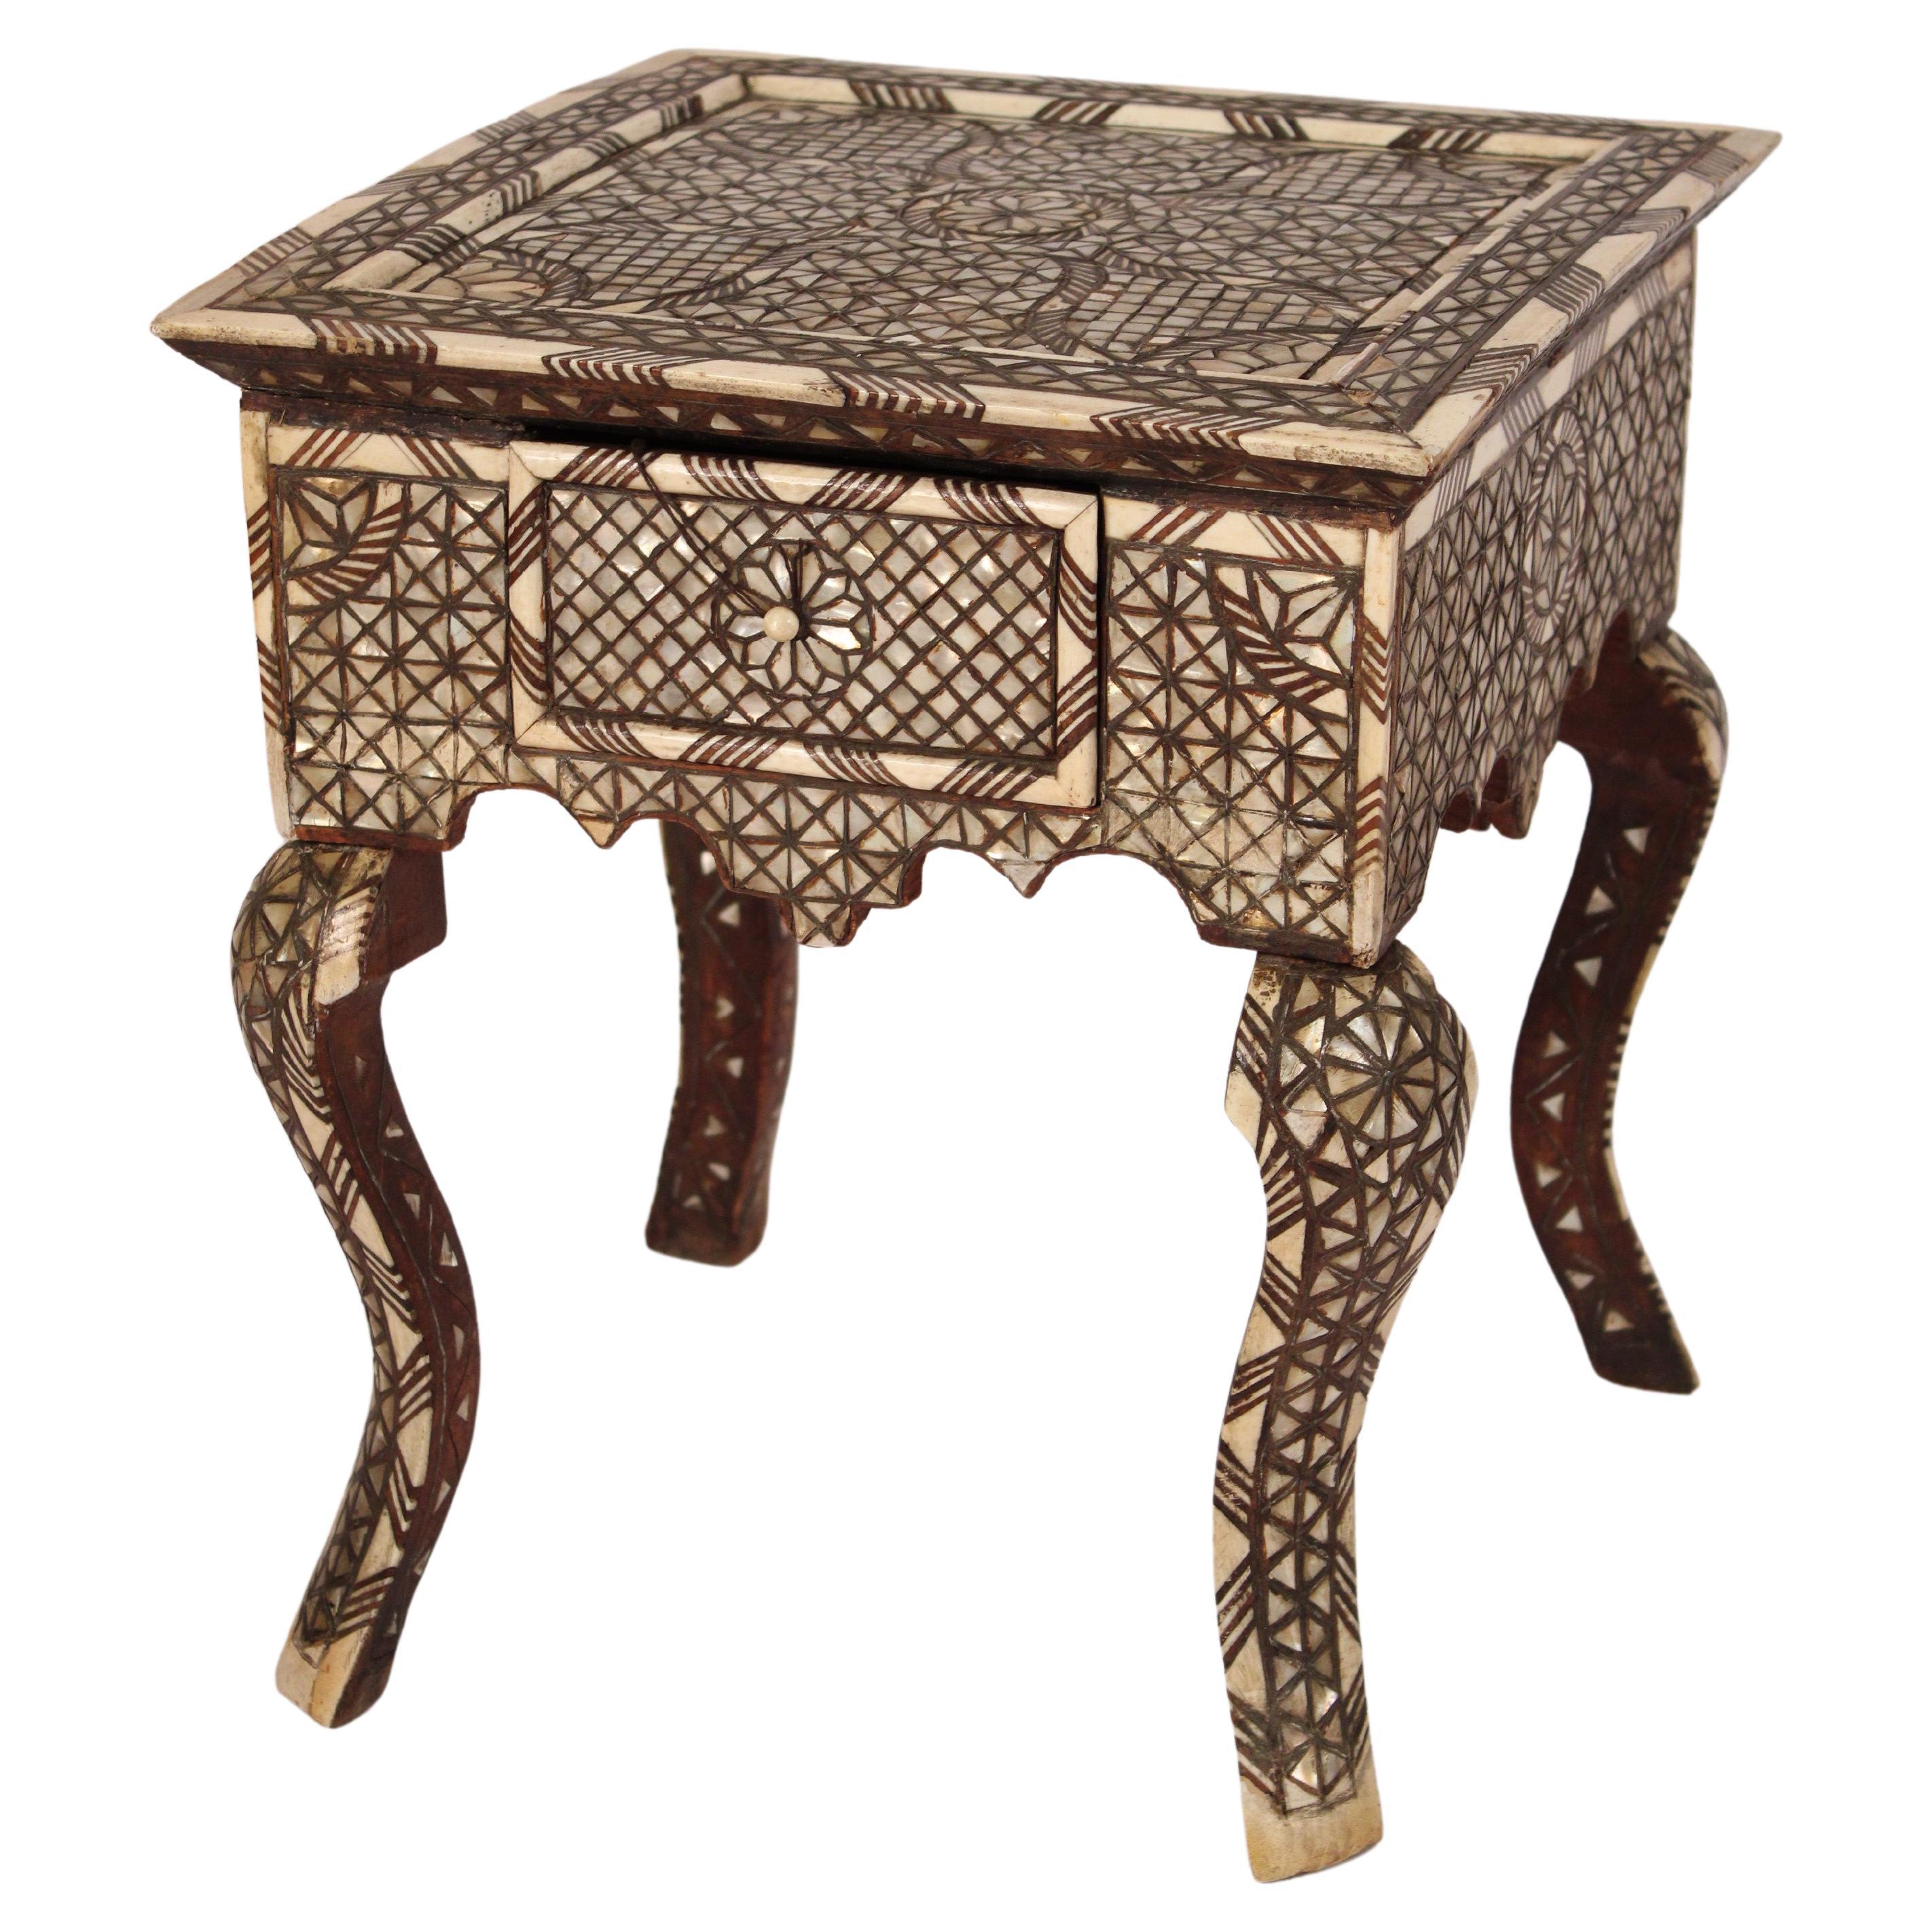 Middle Eastern Mother of Pearl and Bone Inlaid Side Table